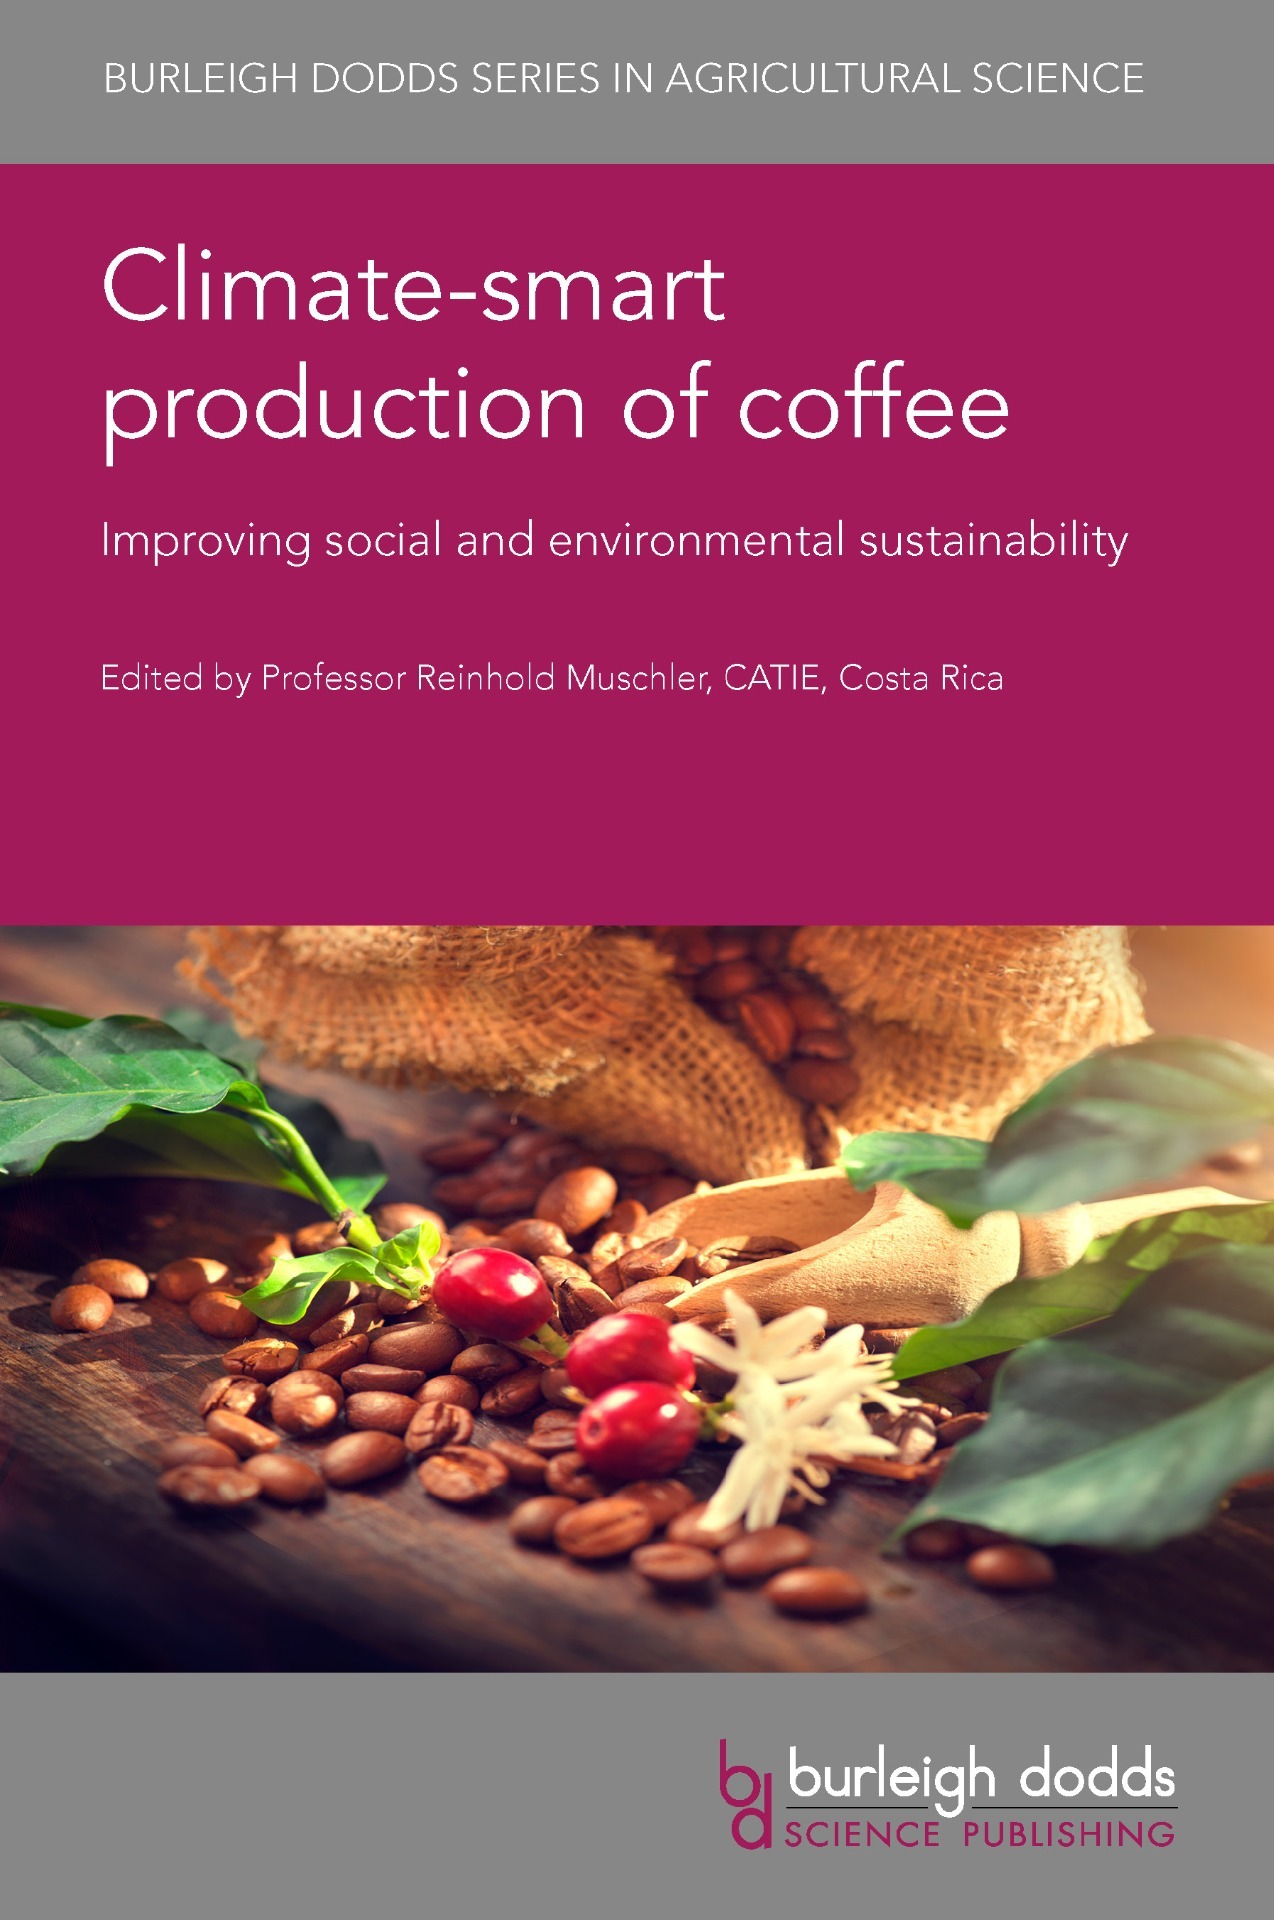 Climate-smart production of coffee